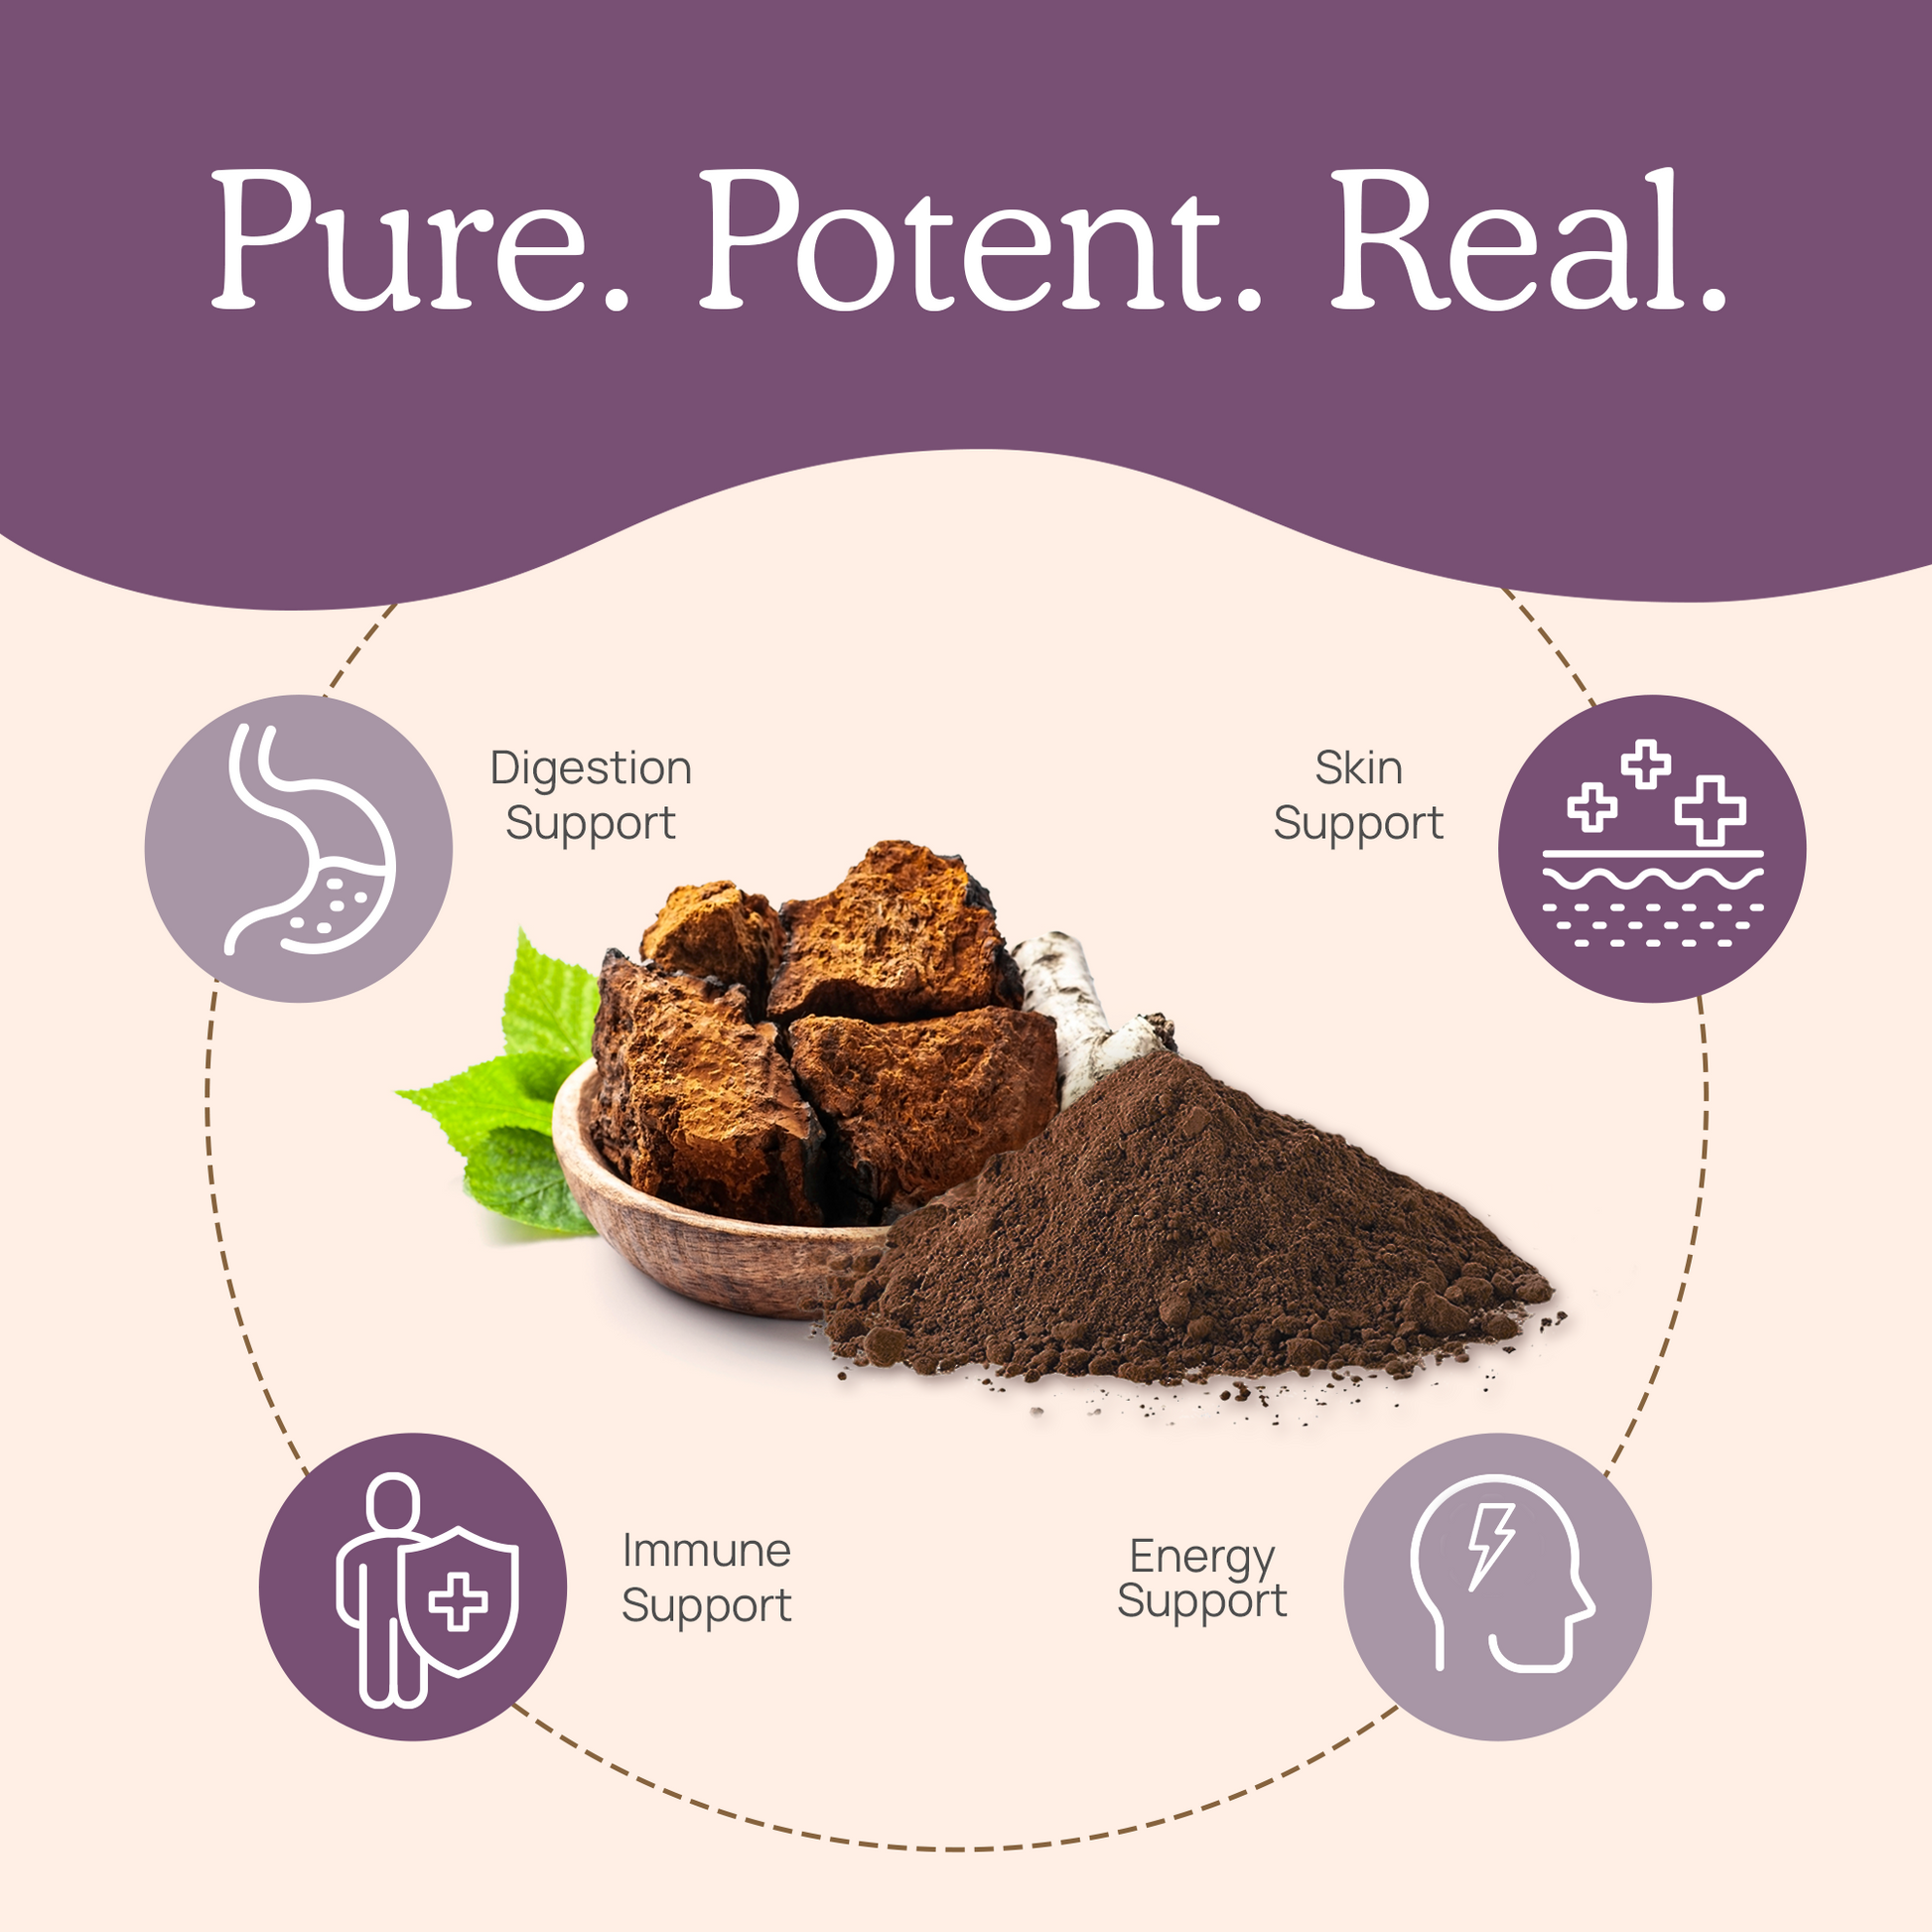 Real Mushrooms' Organic Chaga Extract Capsules for Pets are pure, potent, and real.